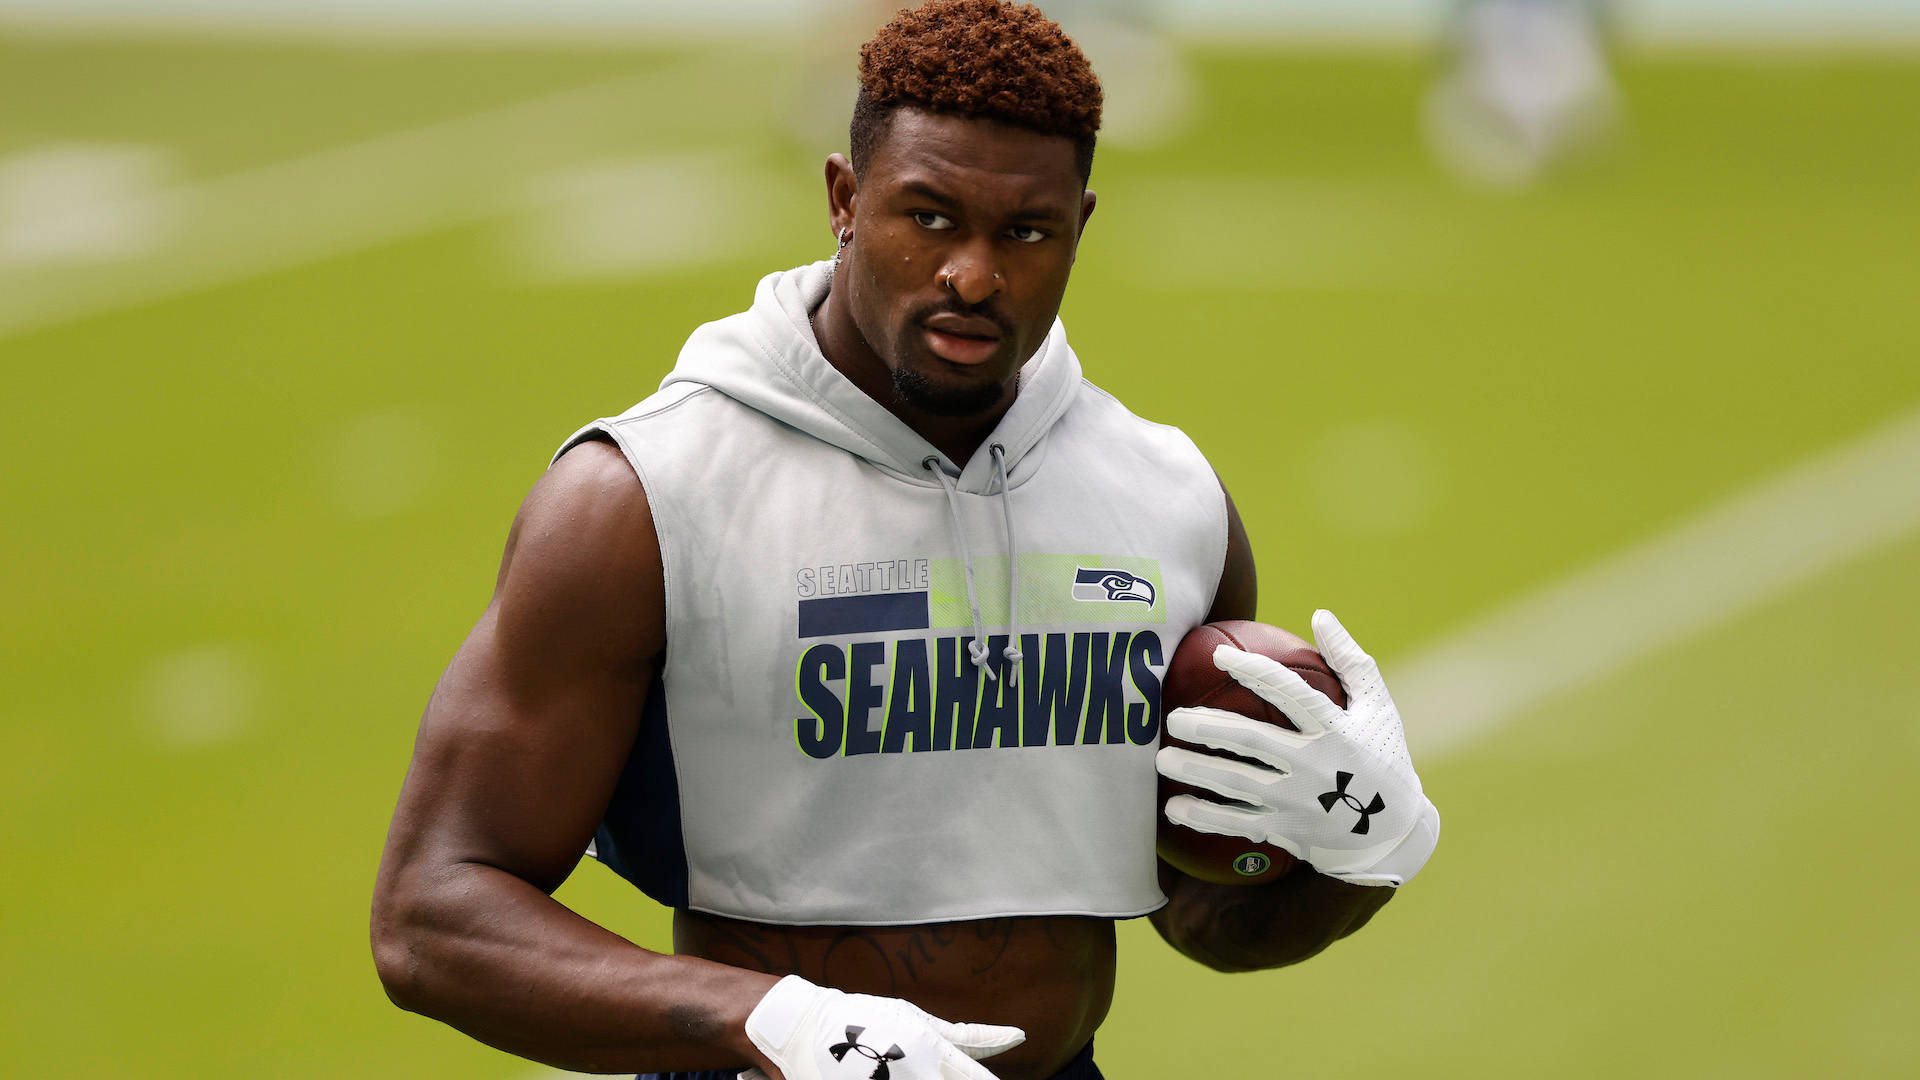 Seattle Seahawks’ Star Dk Metcalf In Casual White Attire